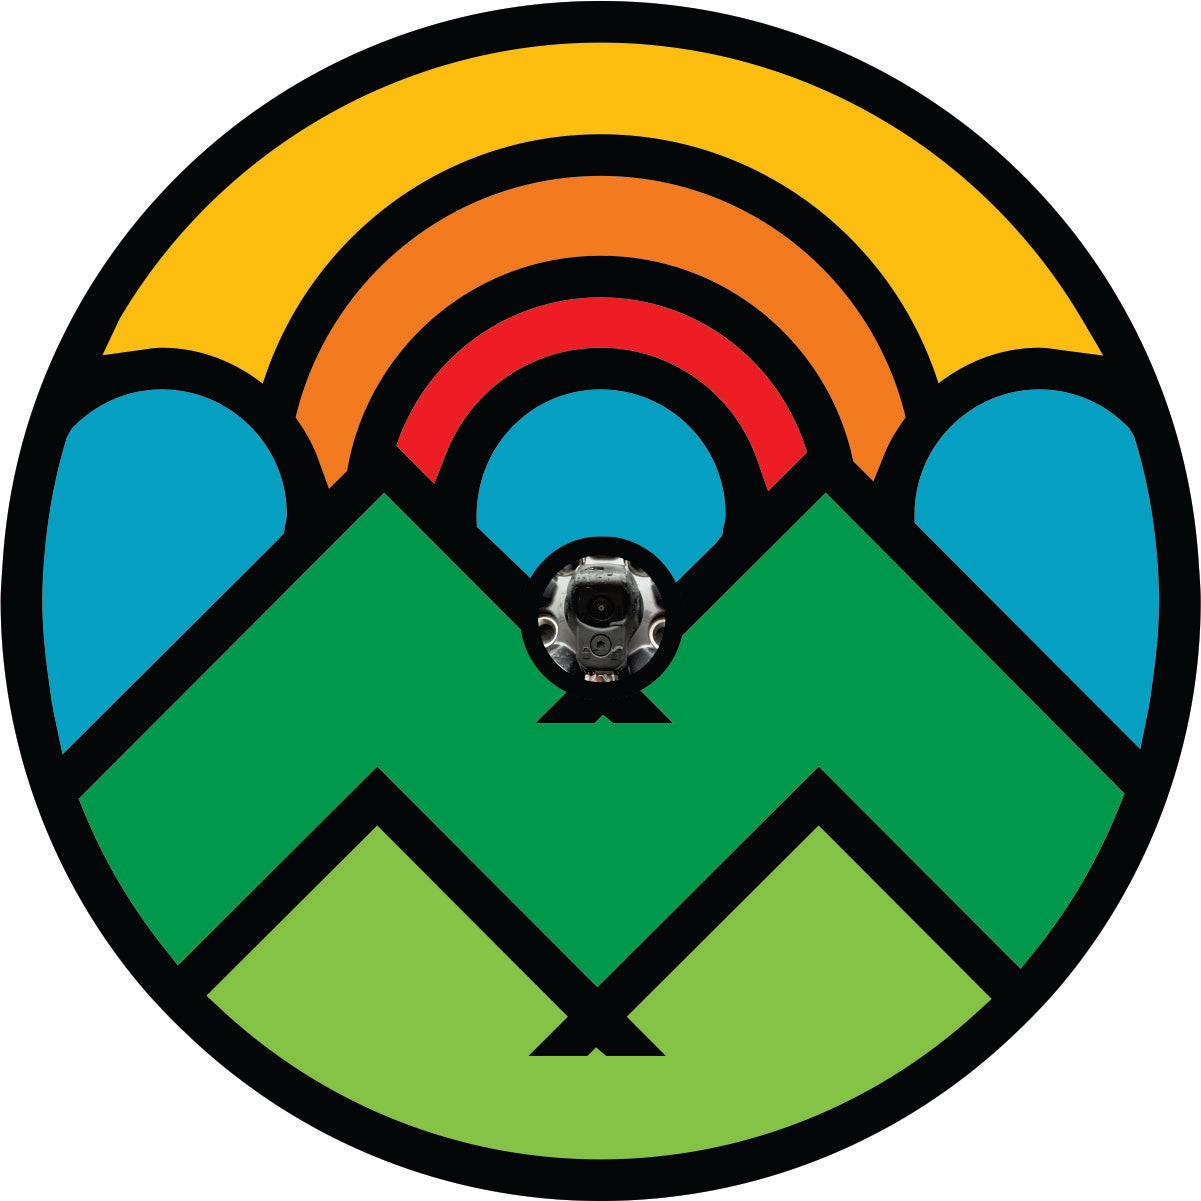 Big shapes and bright bold colors outlined in black make up the illusion of a mountain and sun scene spare tire cover design with a back up camera hole. 